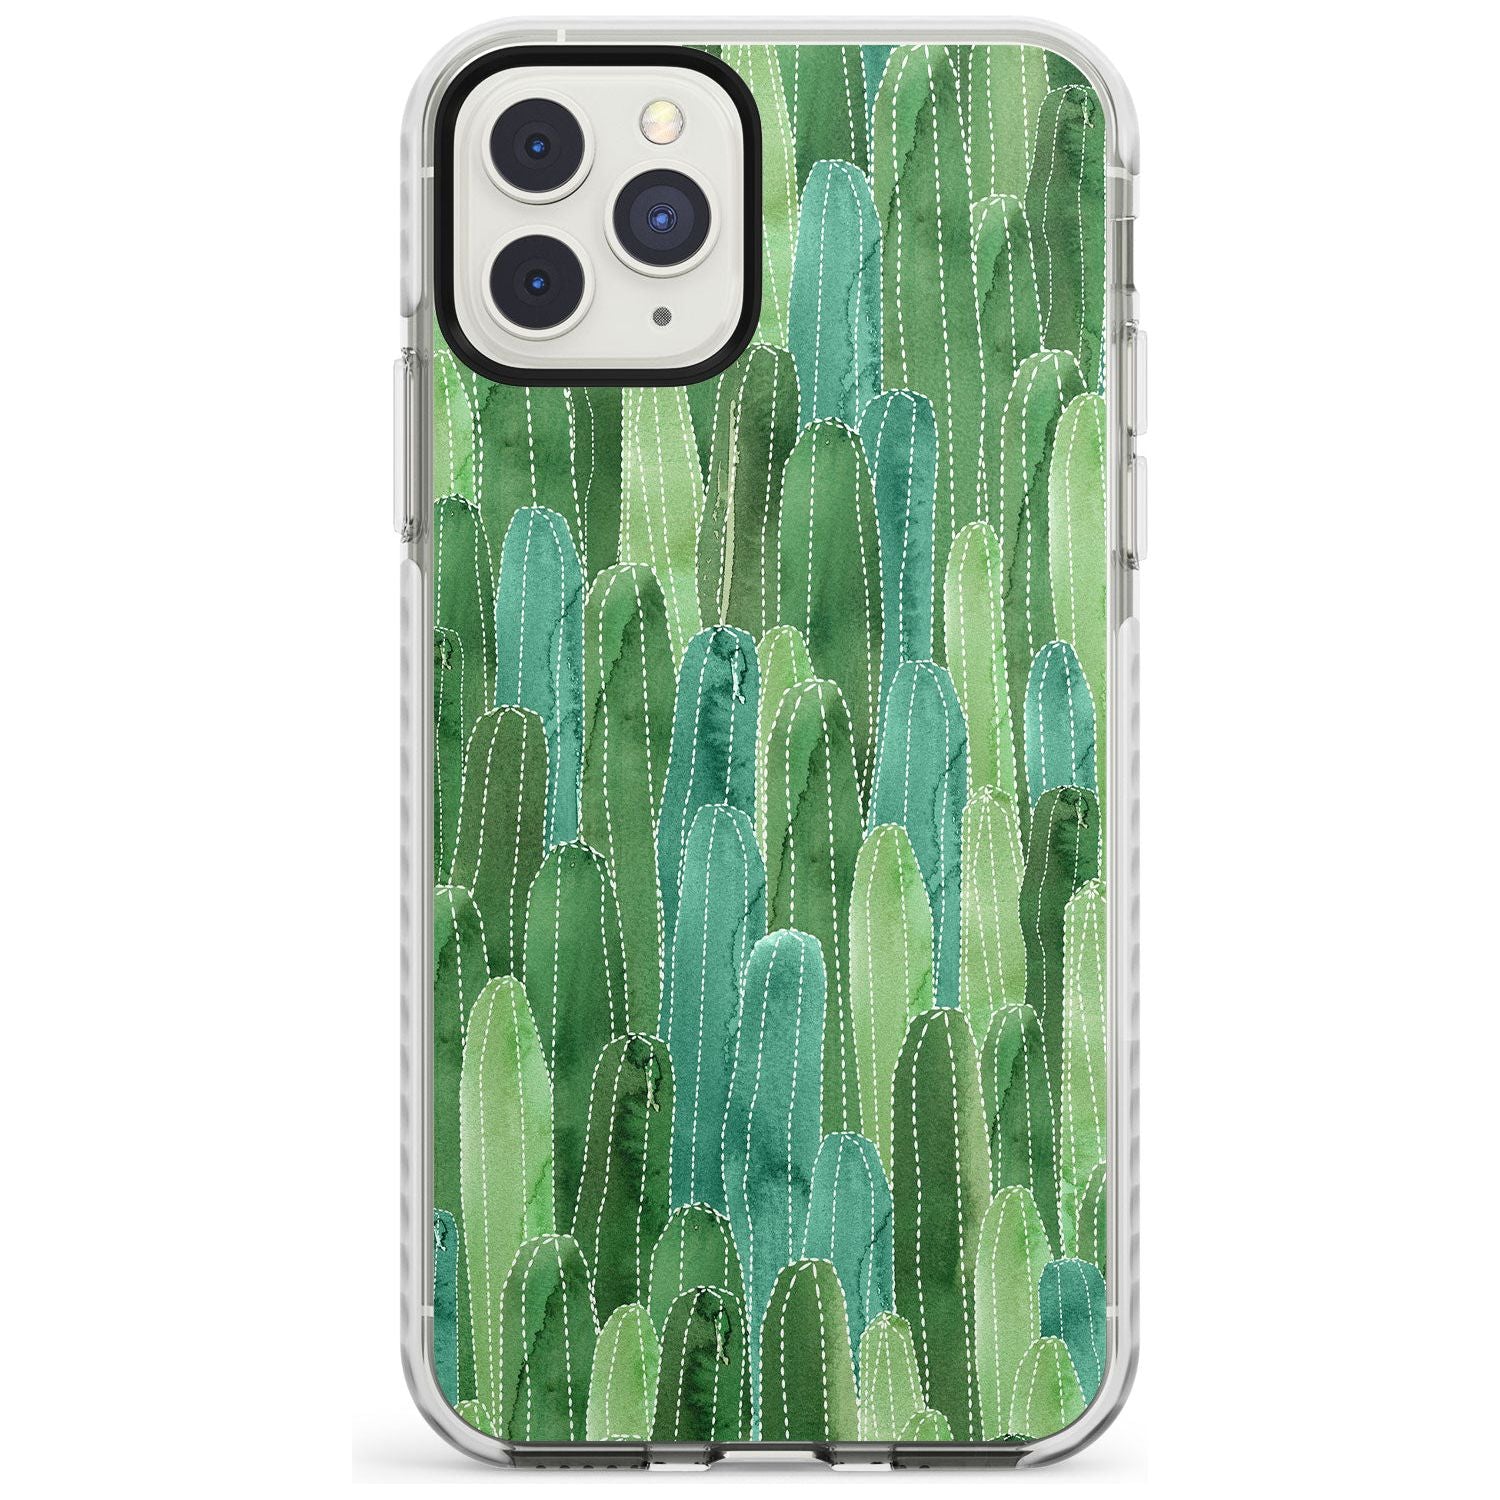 Skinny Cacti Pattern Design Impact Phone Case for iPhone 11 Pro Max